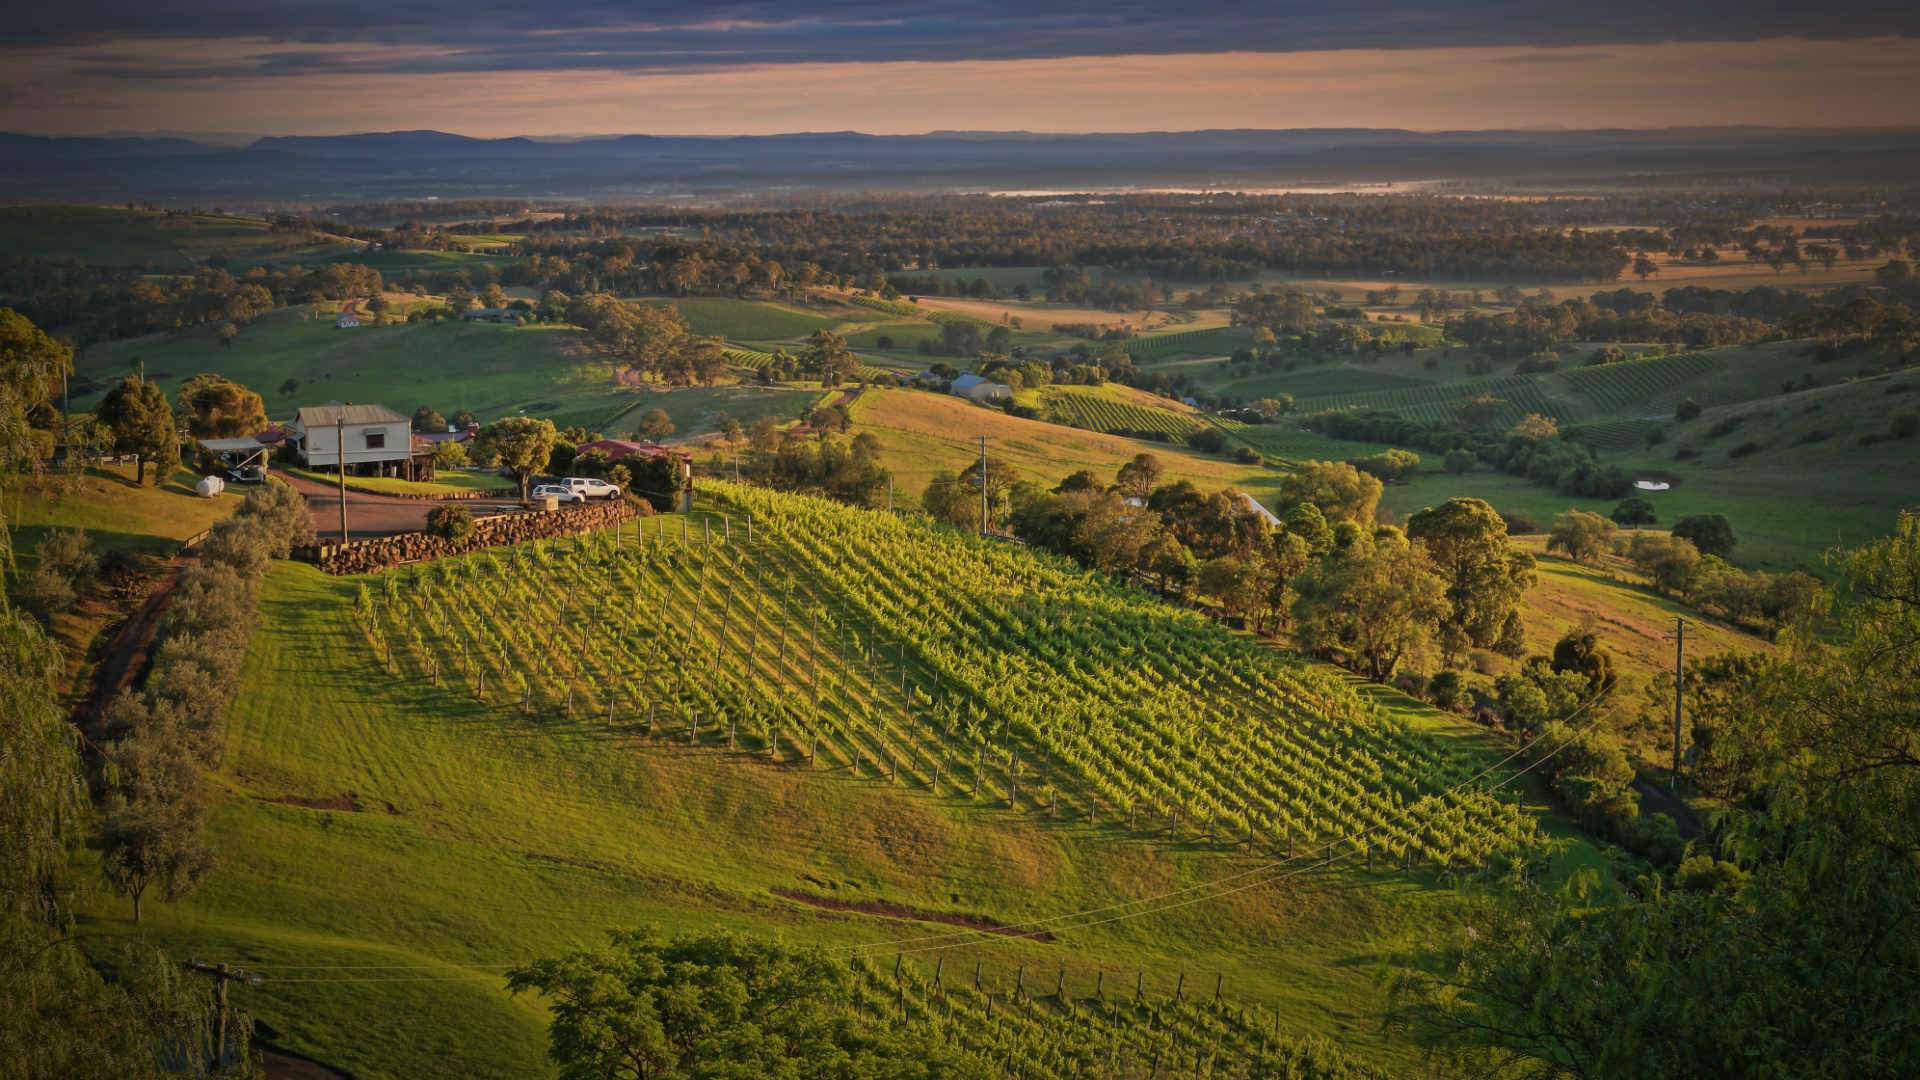 A Weekender's Guide to the Hunter Valley